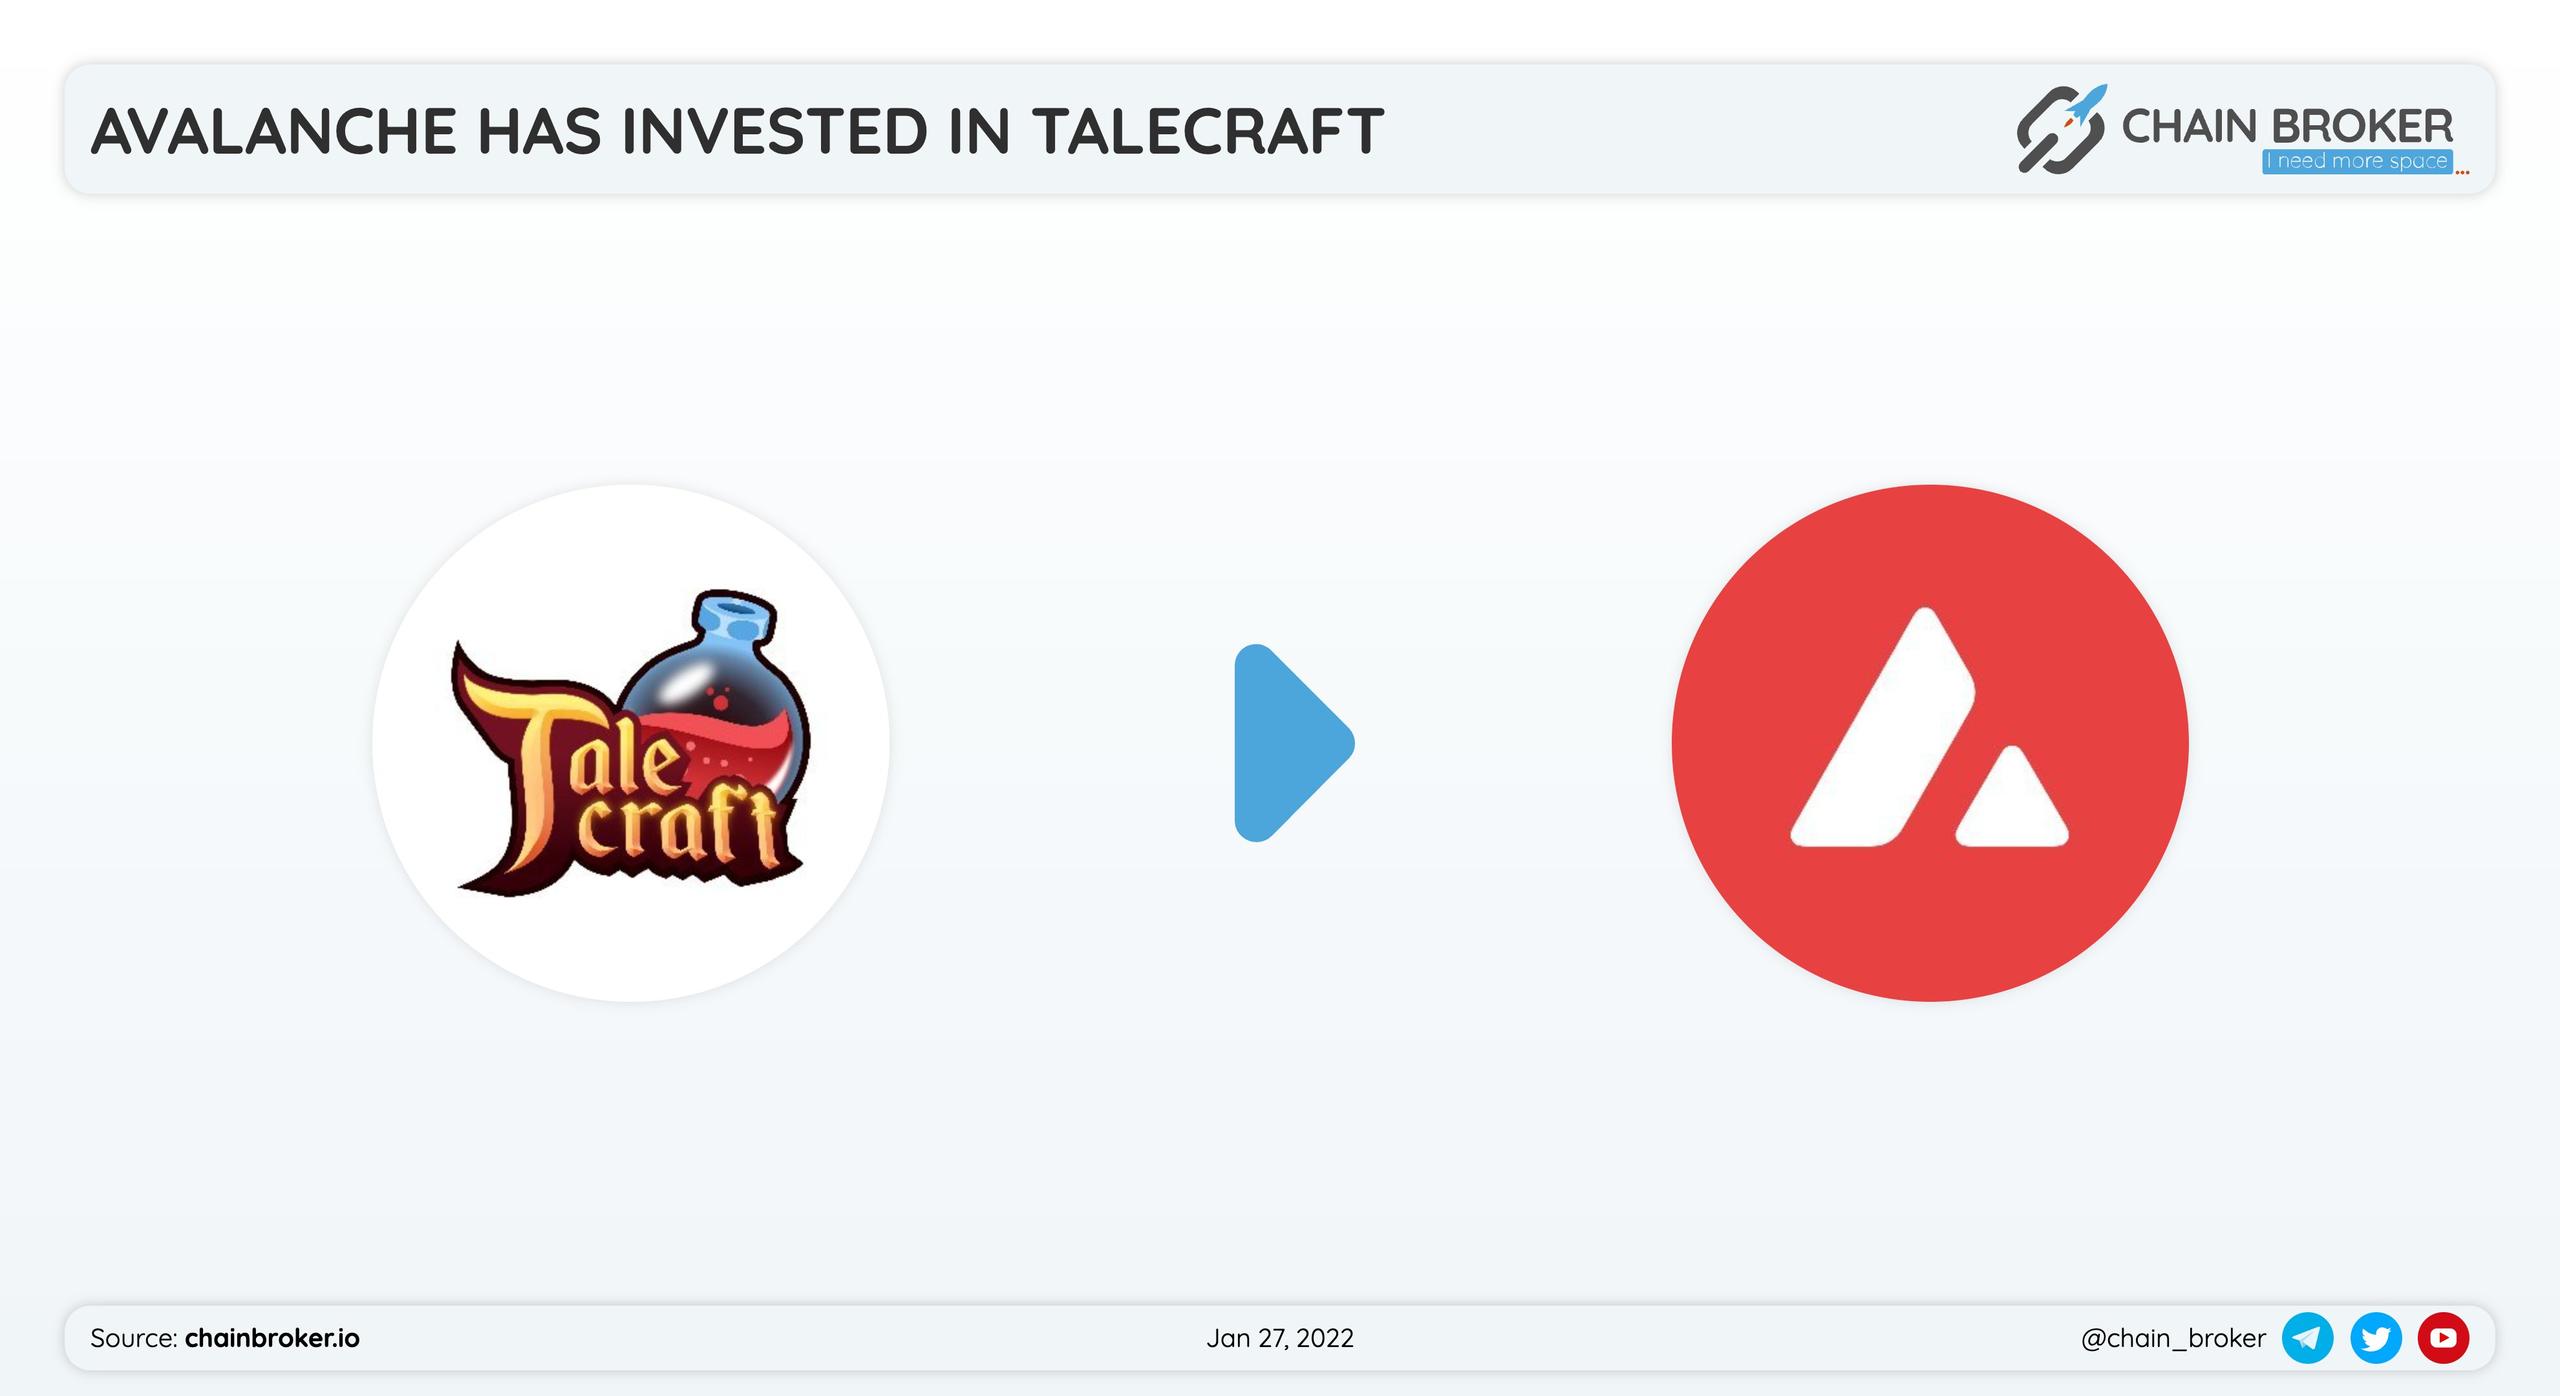 Talecraft has secured investment from Avalanche.